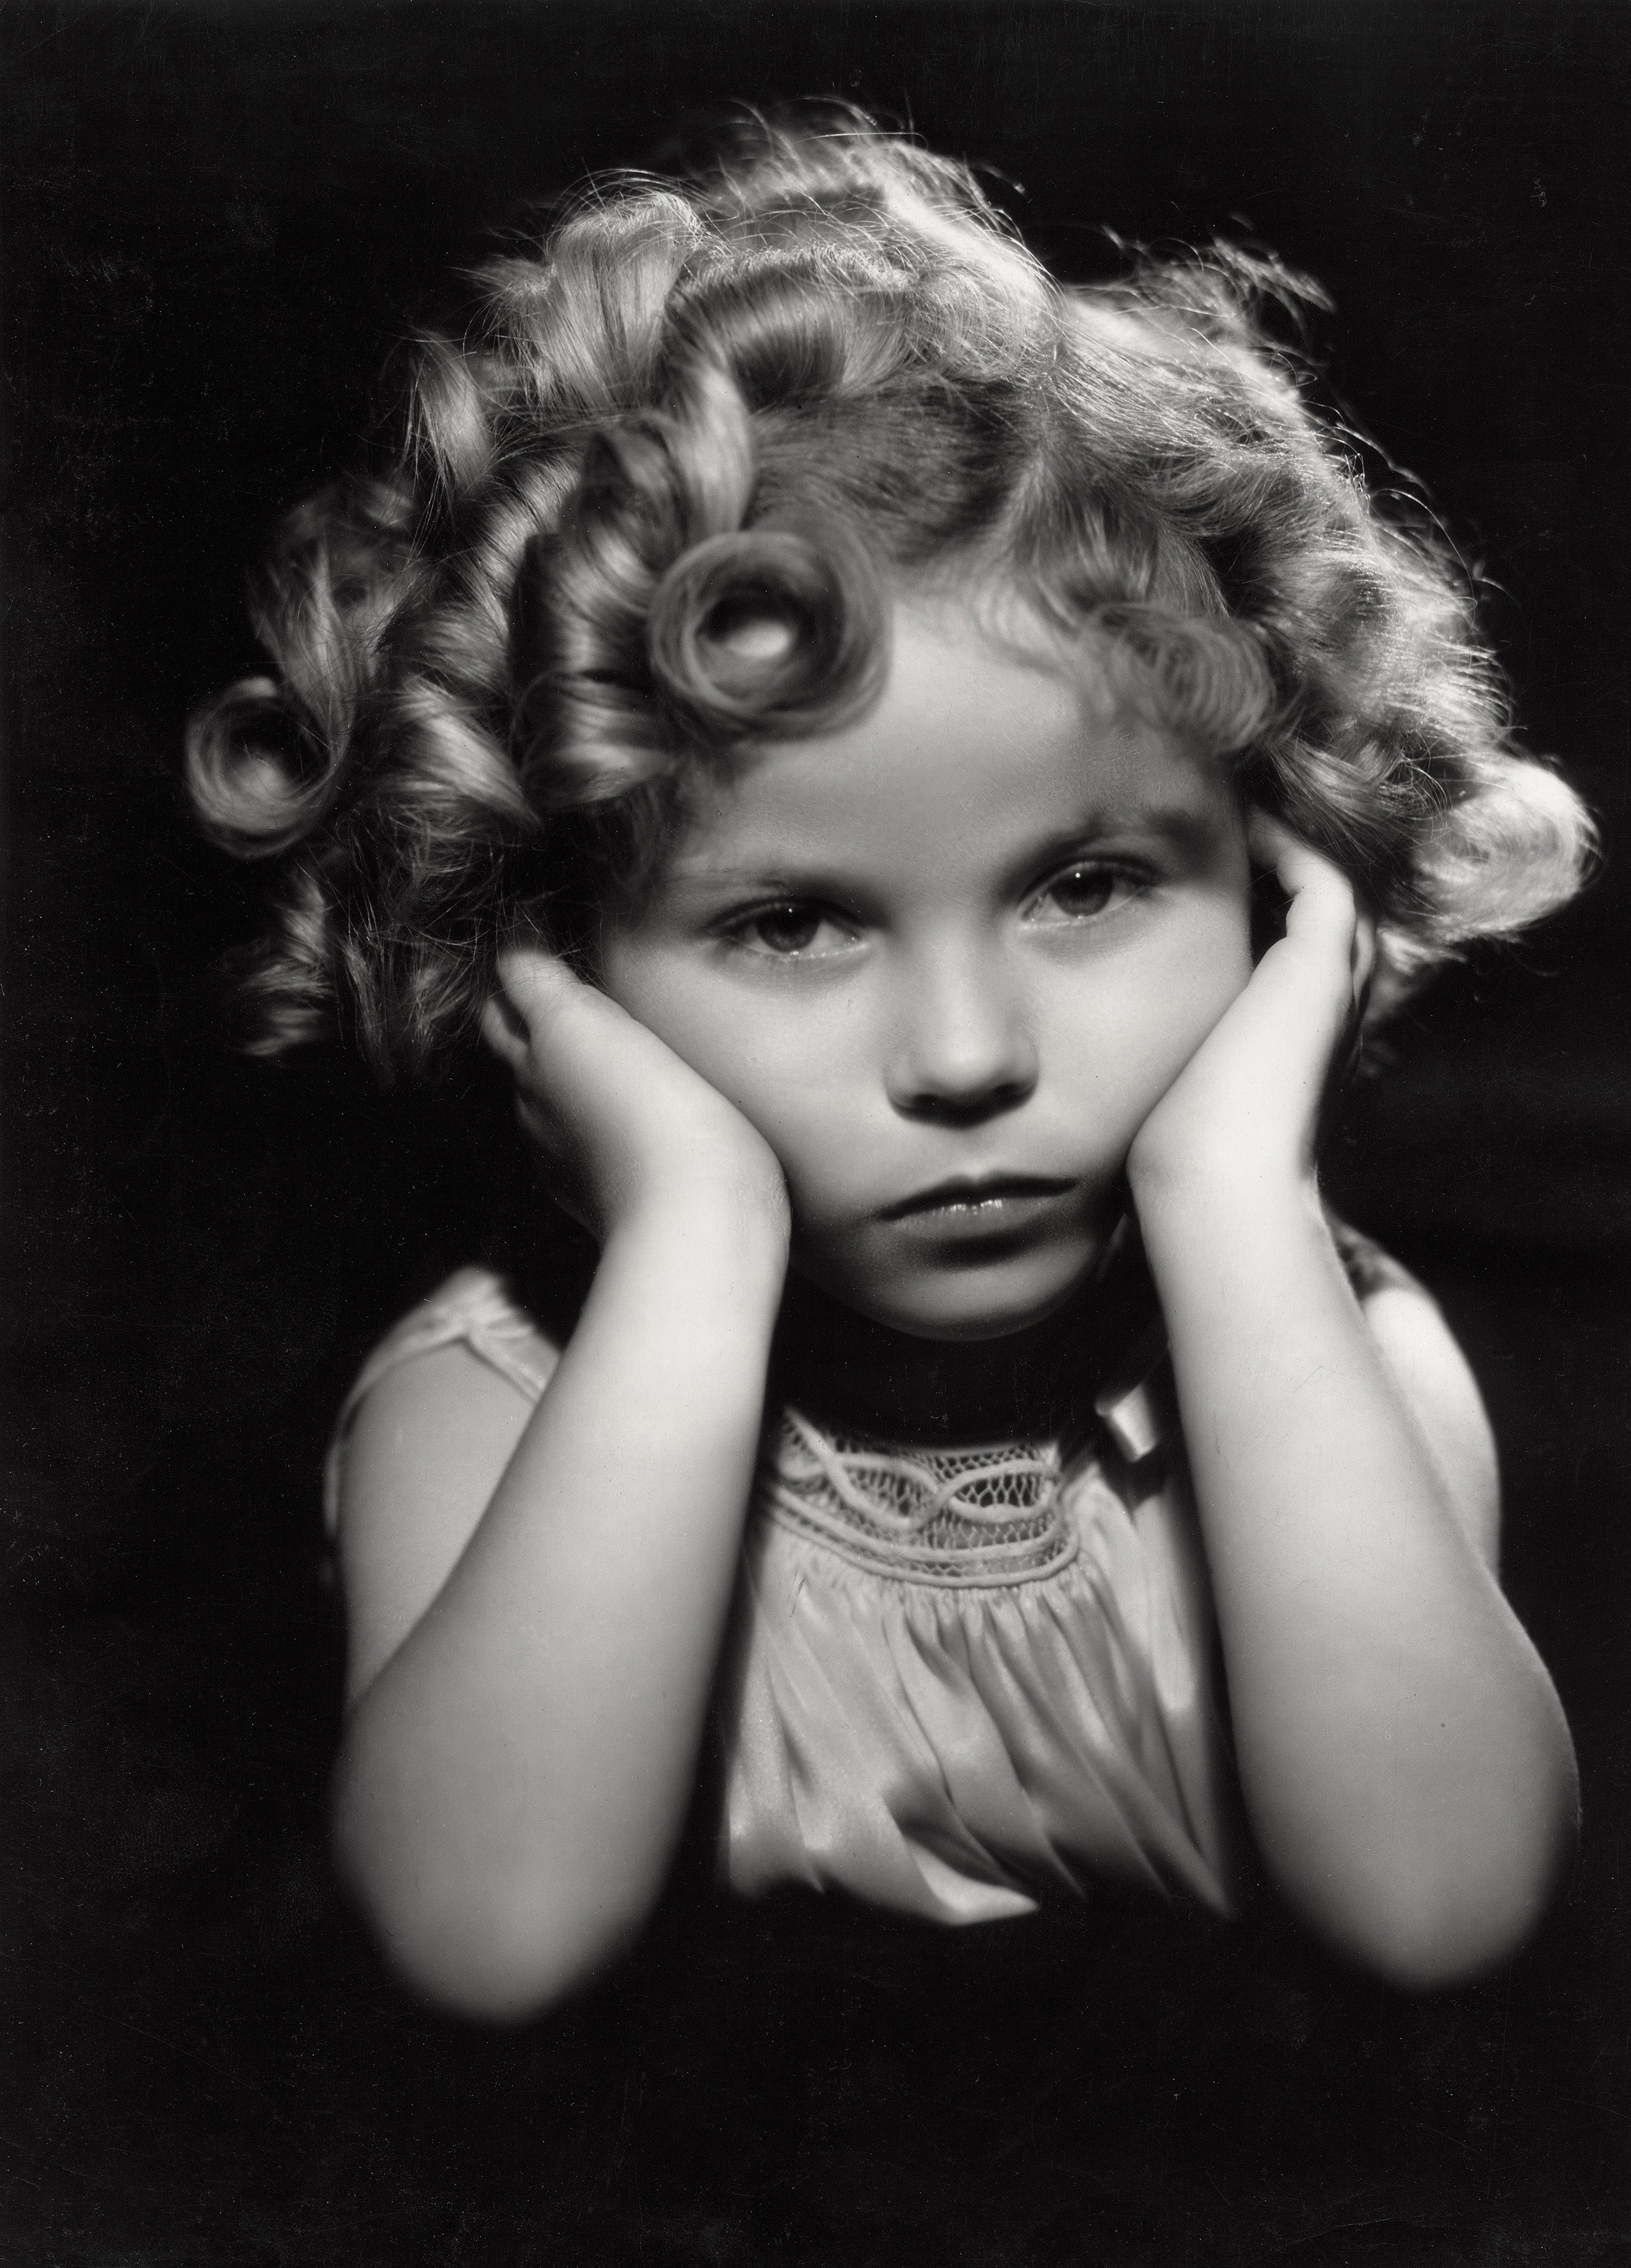 Shirley Temple posing with her head in her hands